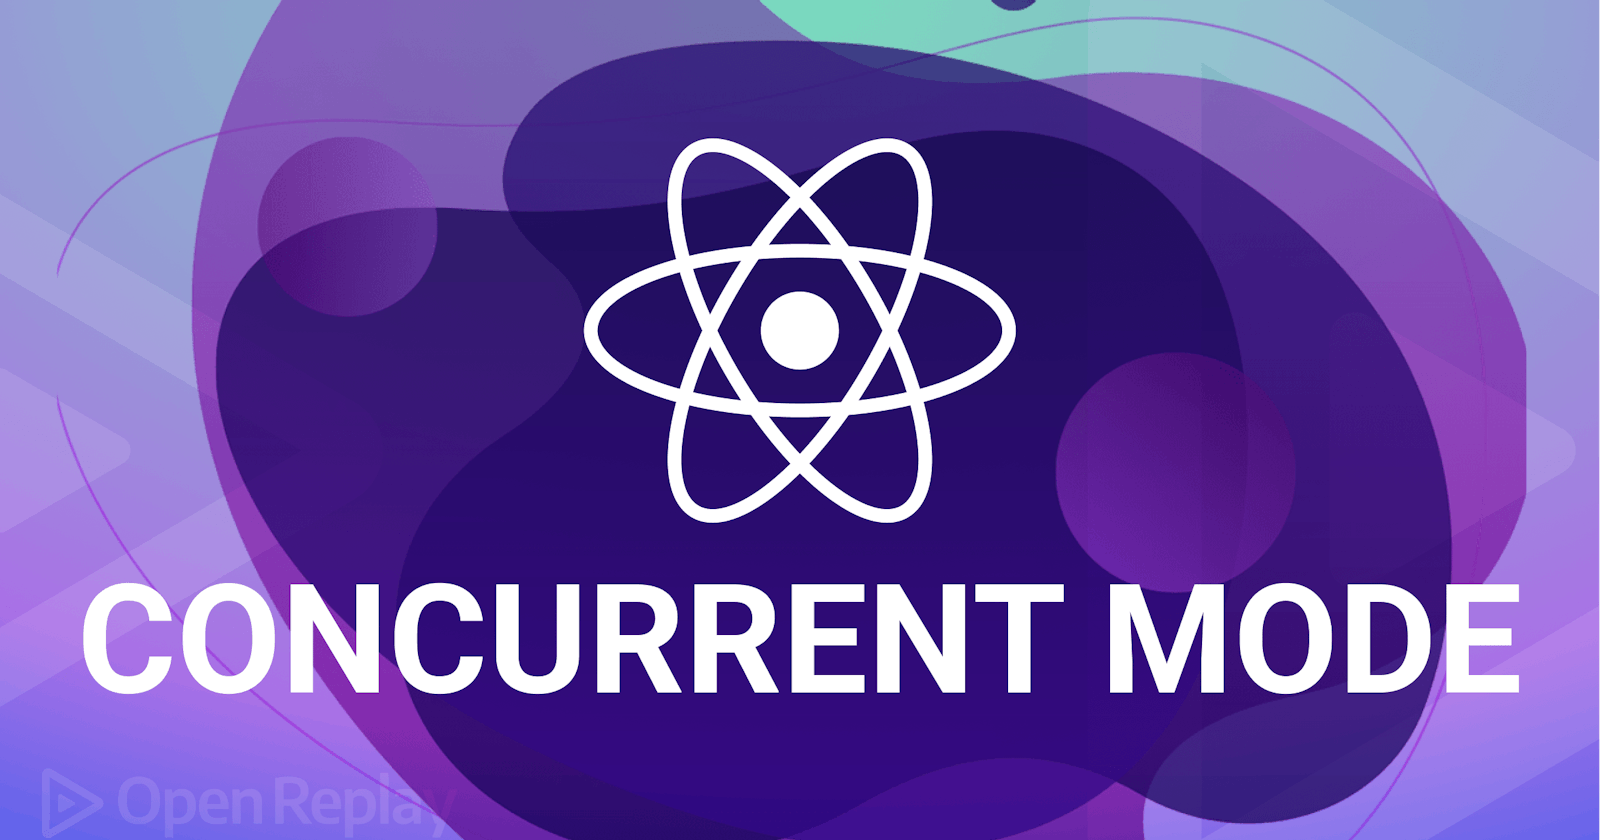 Concurrent Mode in React: an overview